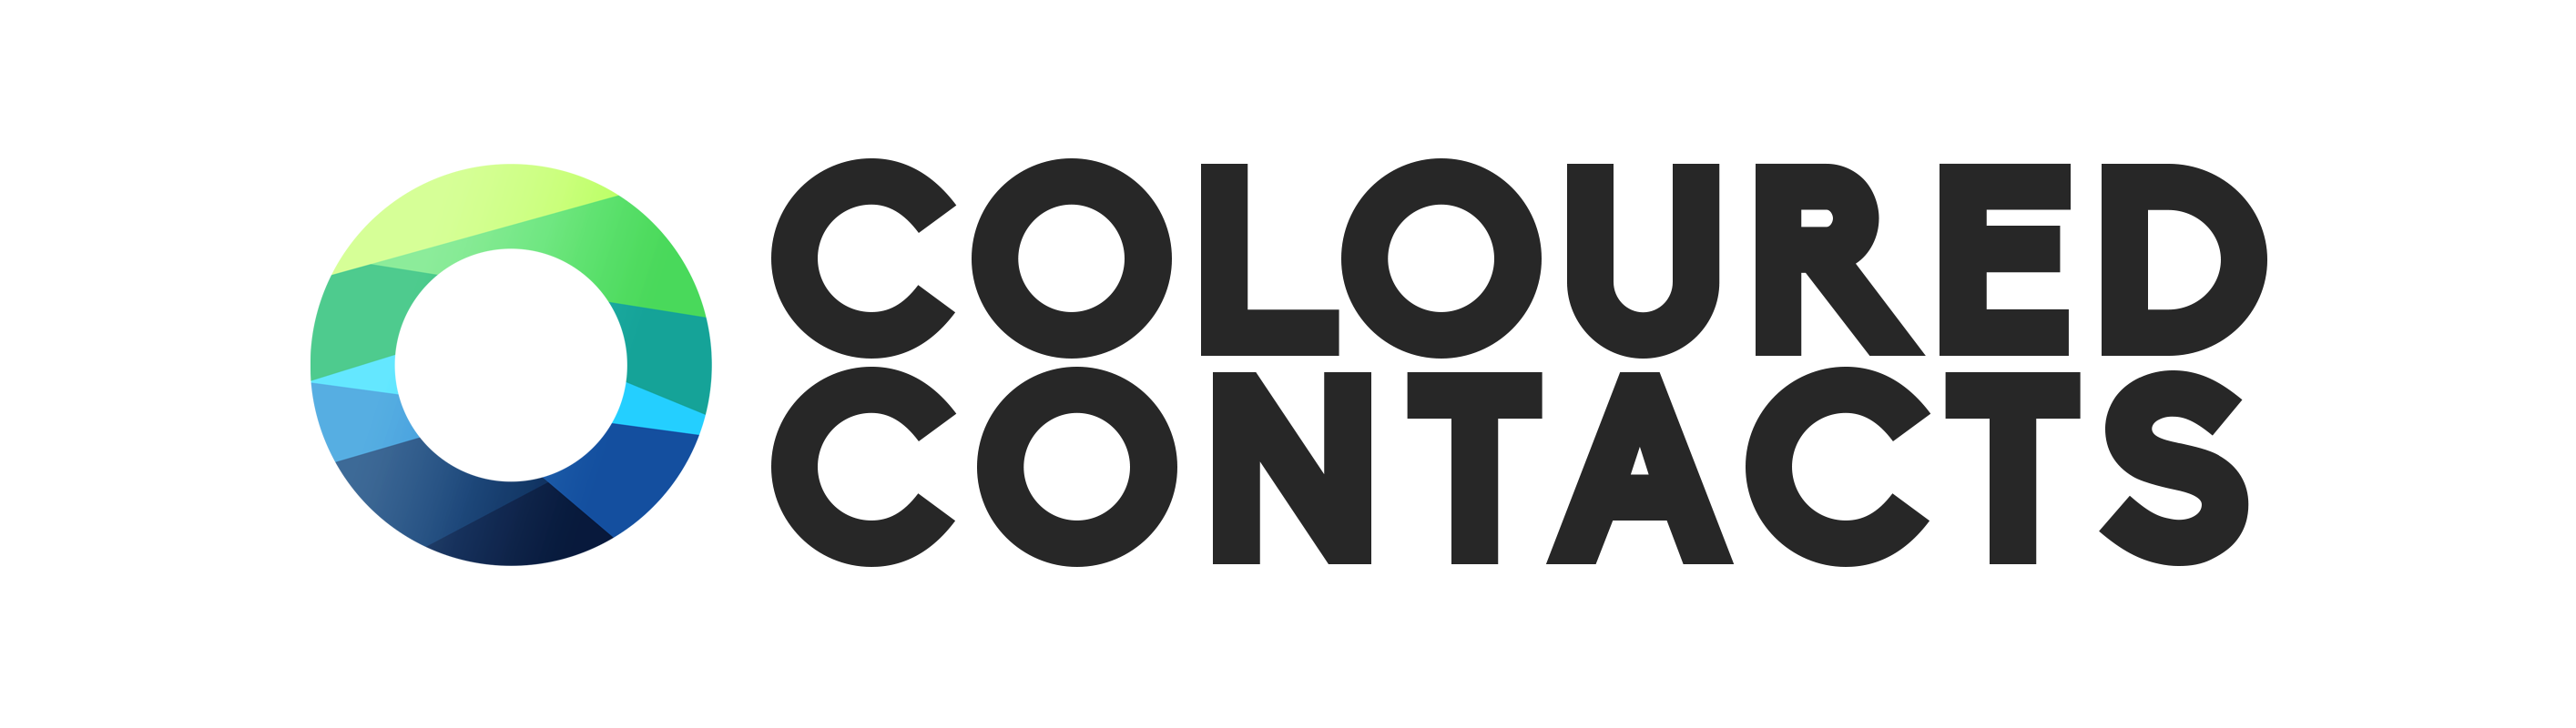 Coloured Contacts logo